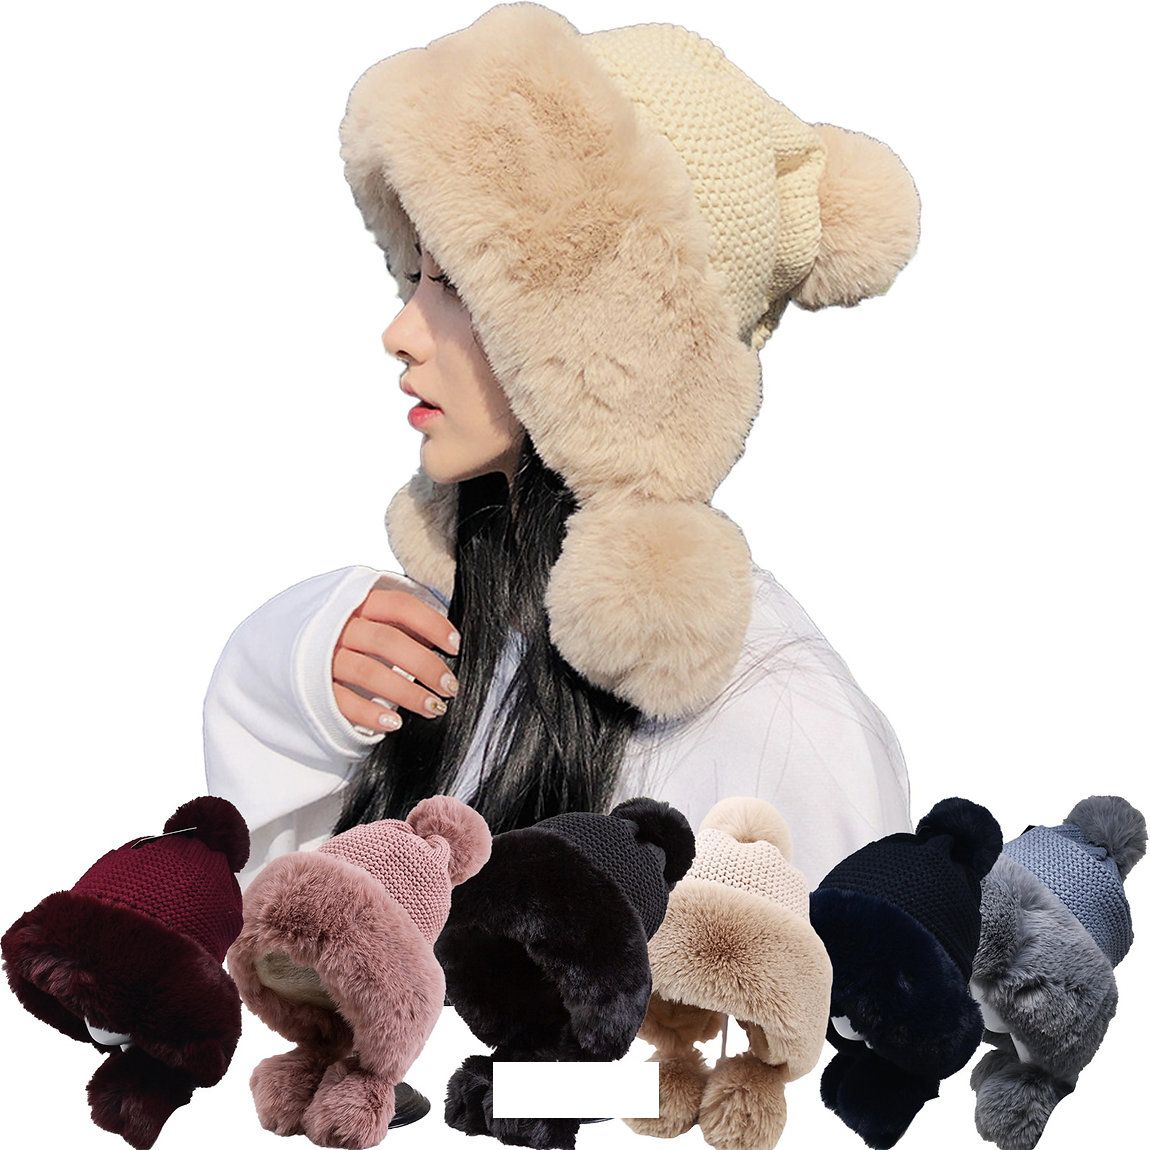 12 Pieces of Women's Winter Fashion Hats Two String Style In Assorted Colors